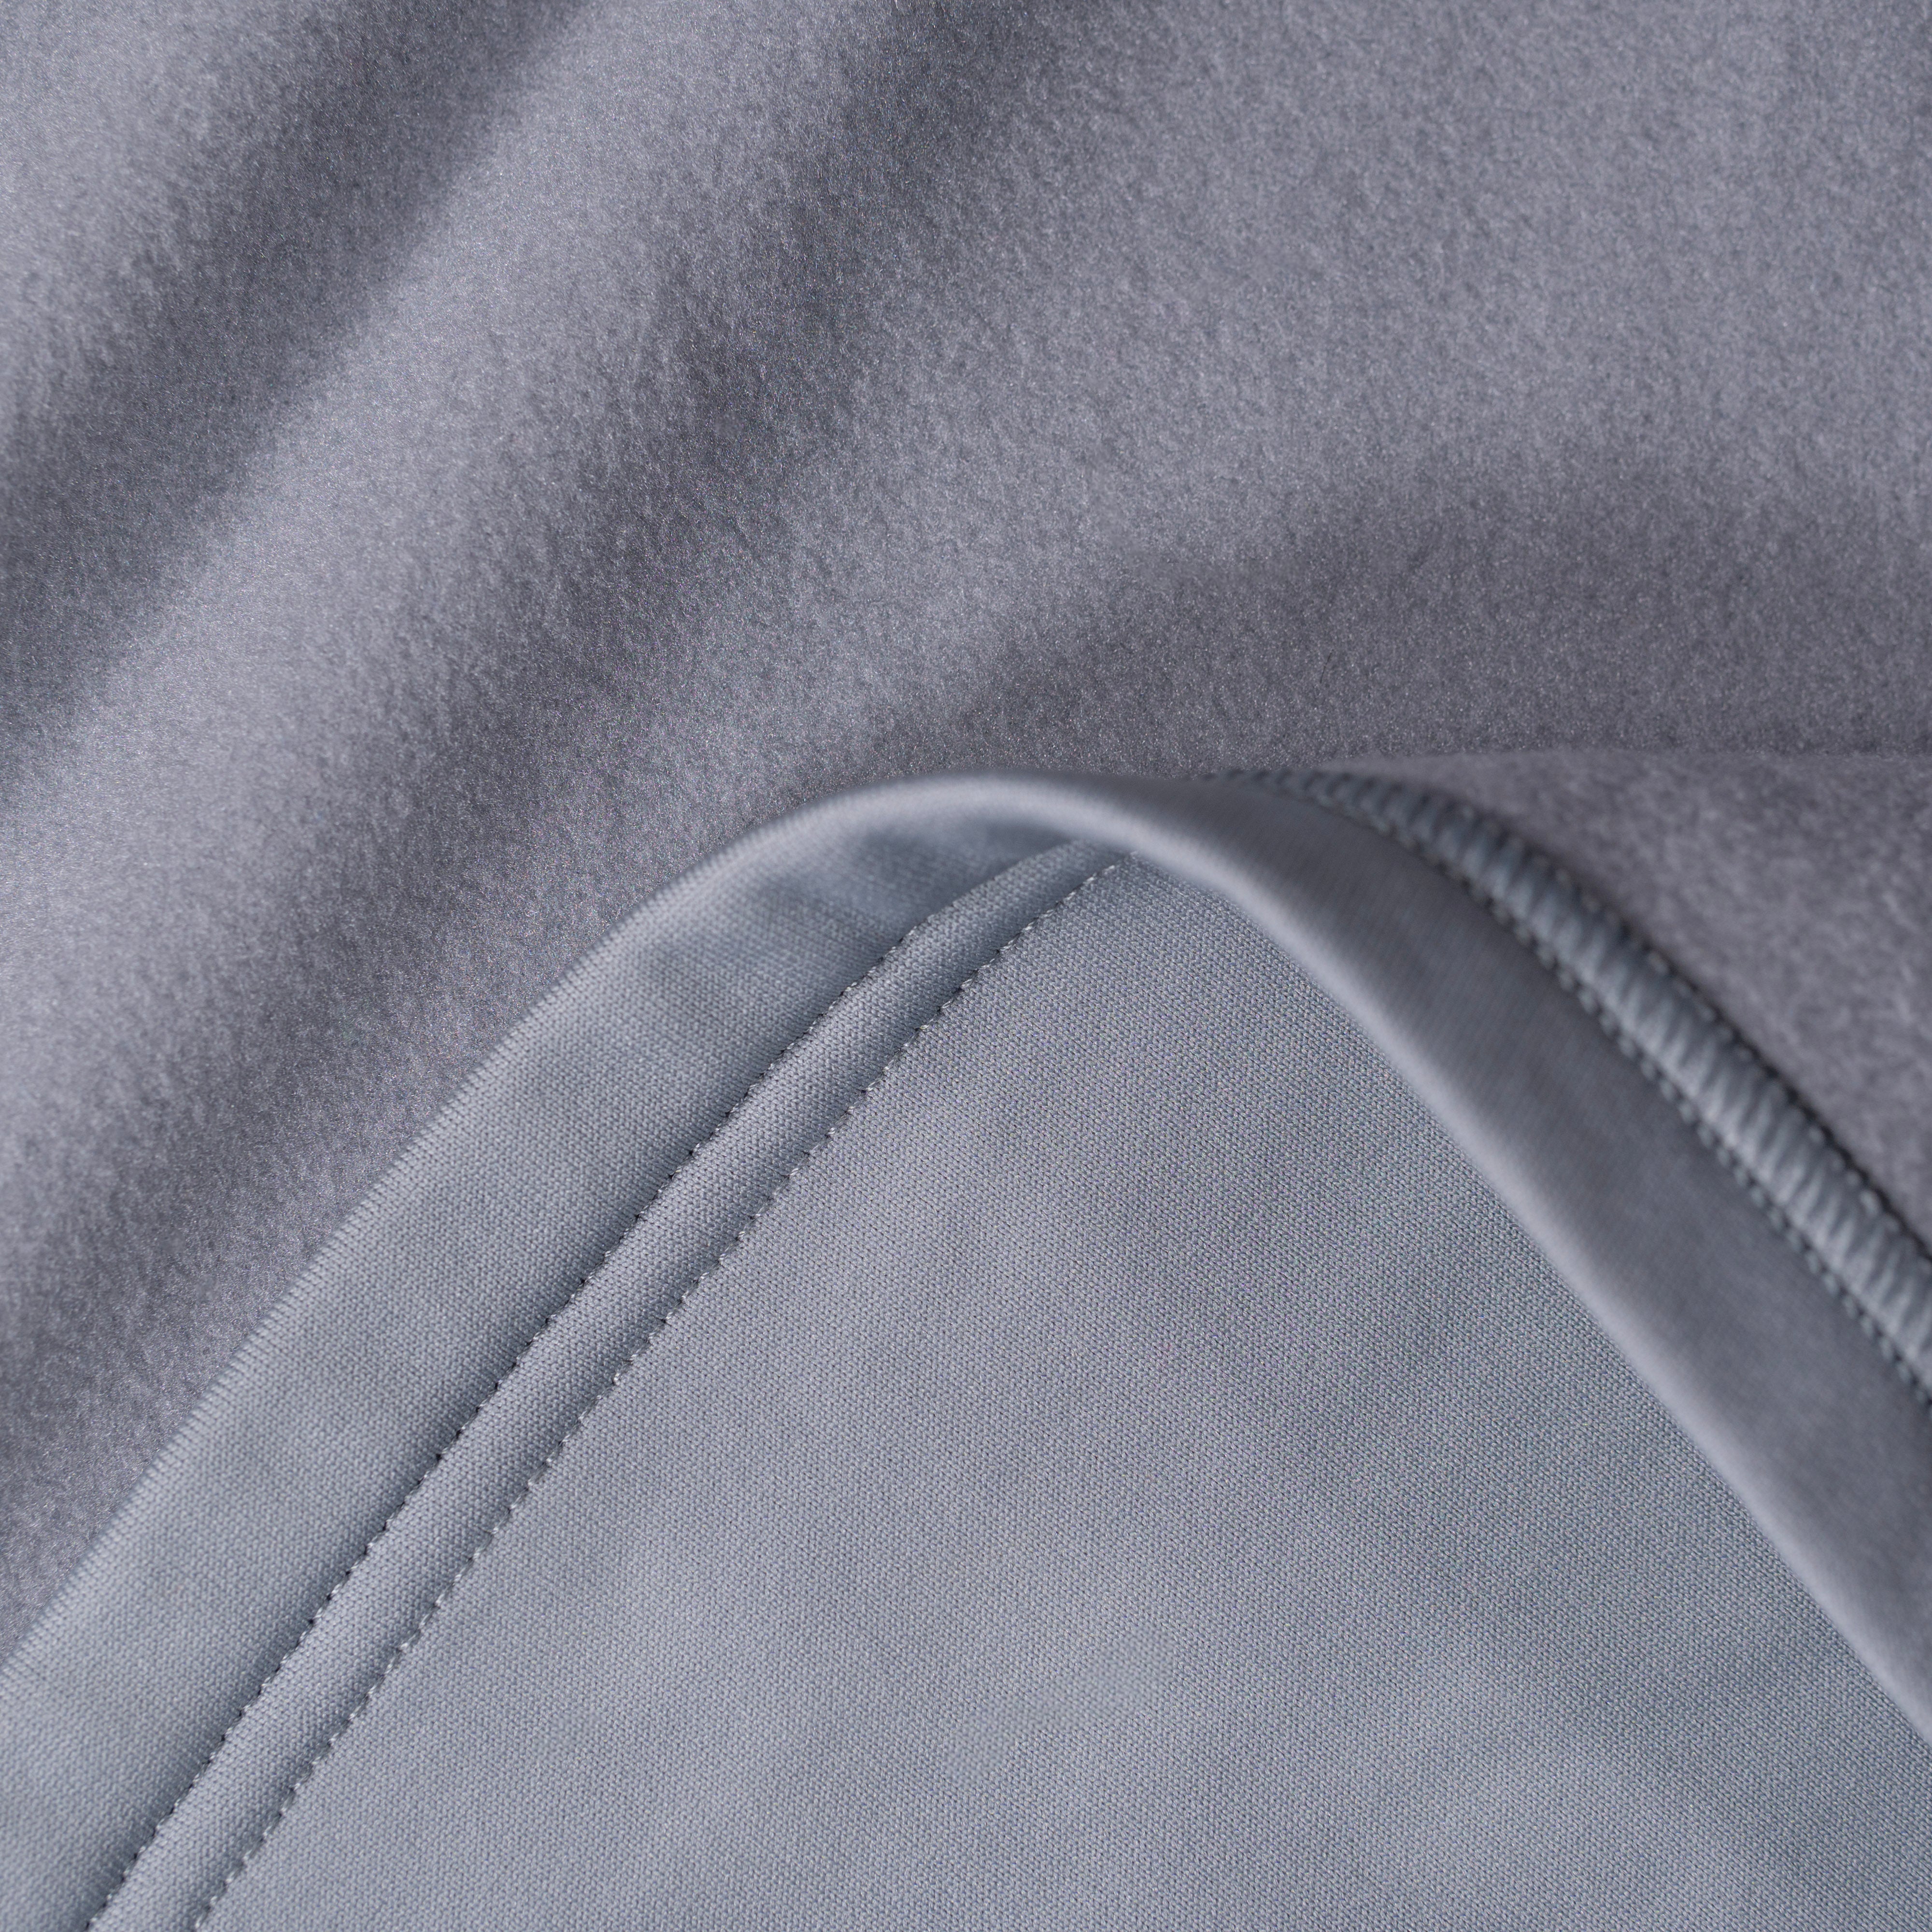 THERMO STRETCH fabric. Built for durable performance.